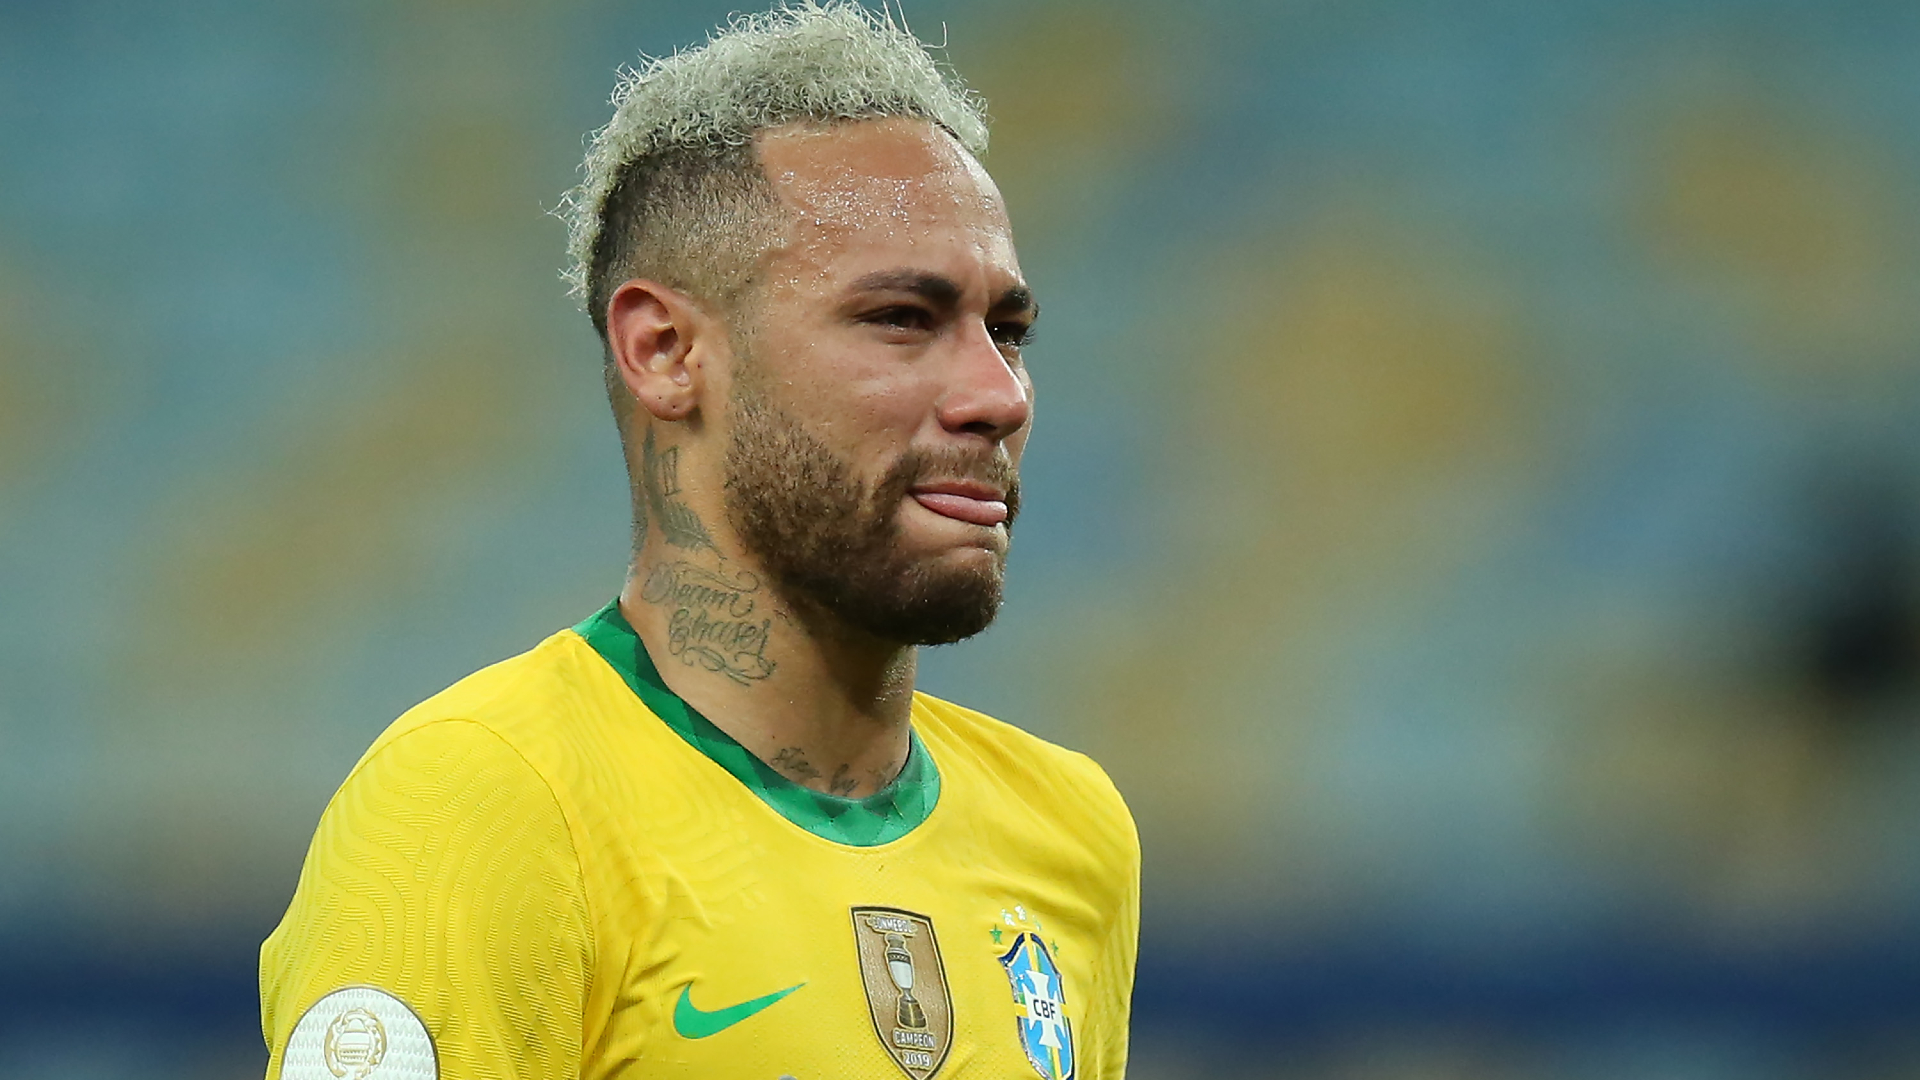 Neymar has spoken about how the World Cup in Qatar could be his last tournament in football as the Brazilian said that he did not have the mental capacity to deal with football anymore. He will return to Brazil in good shape and will give it his all to win the international trophy, as it's his dream.